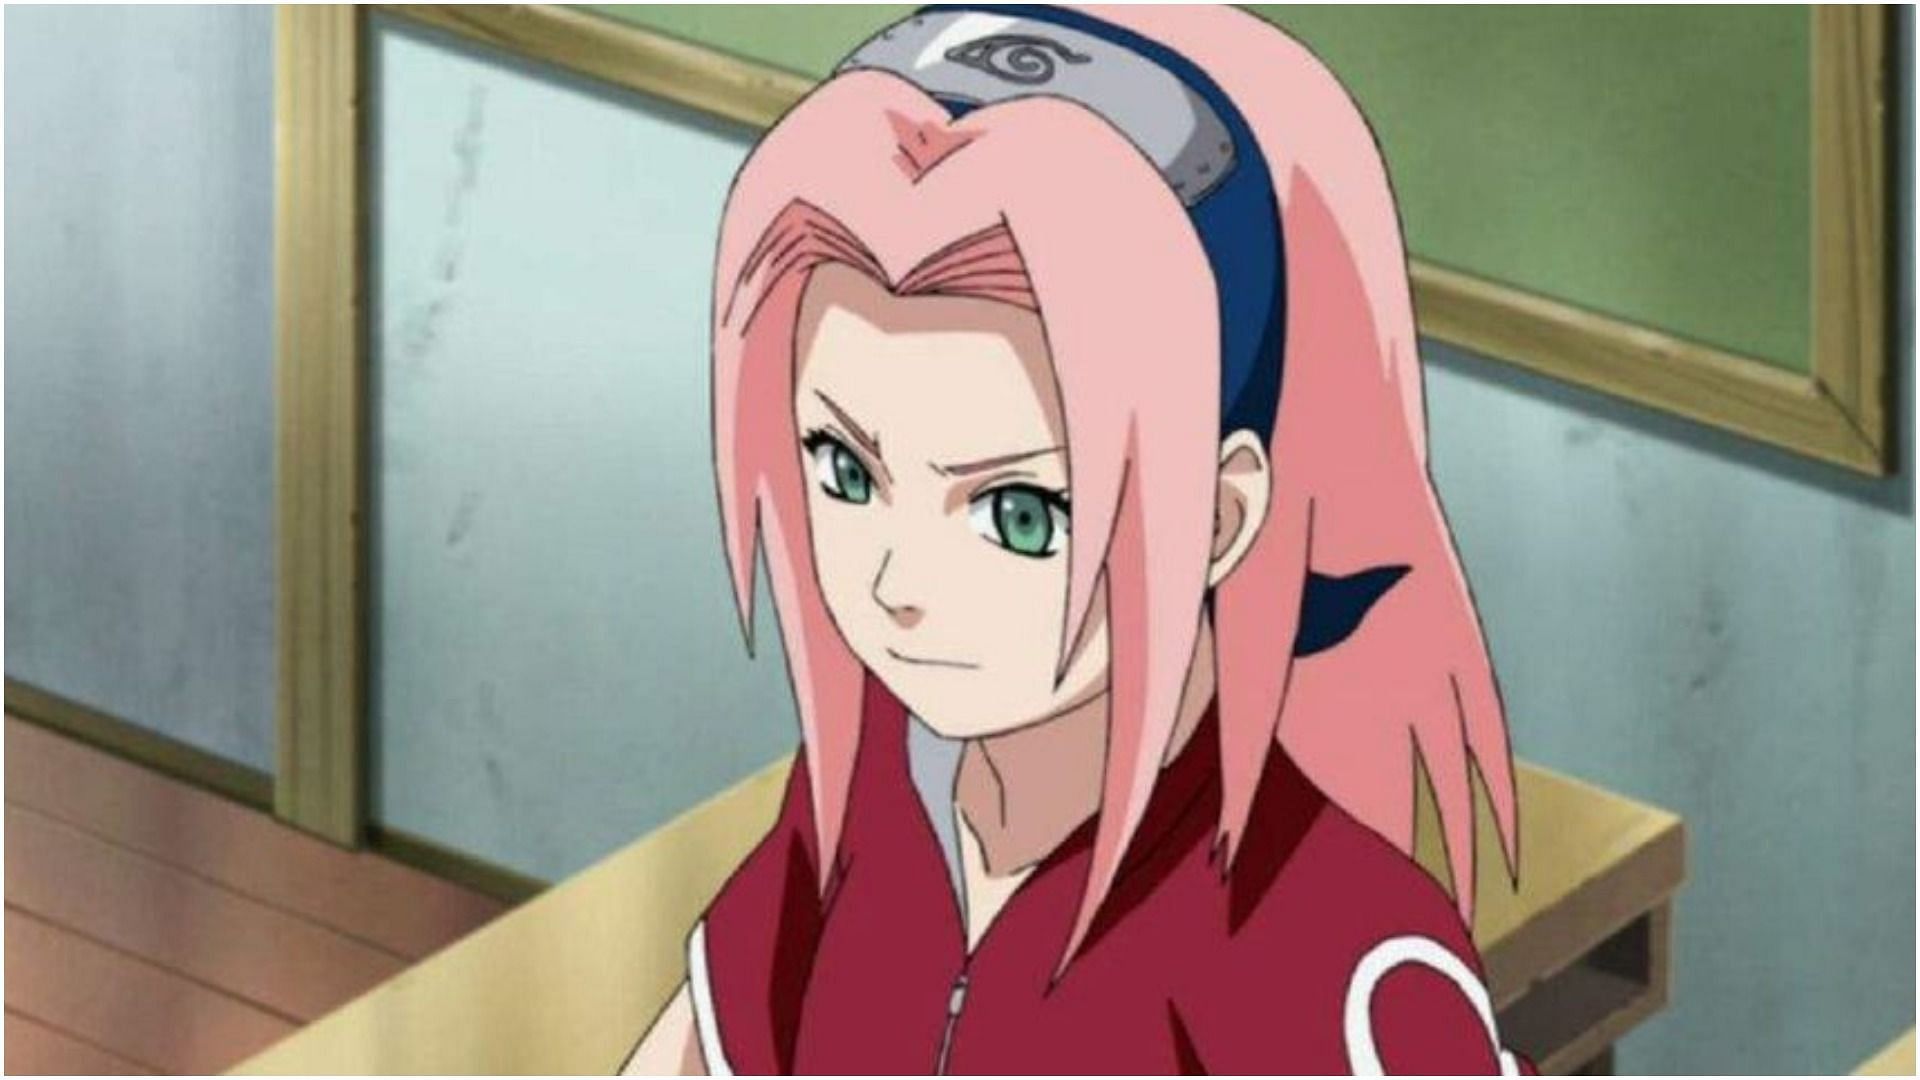 Sakura insulted her friends during her childhood (Image via Naruto)